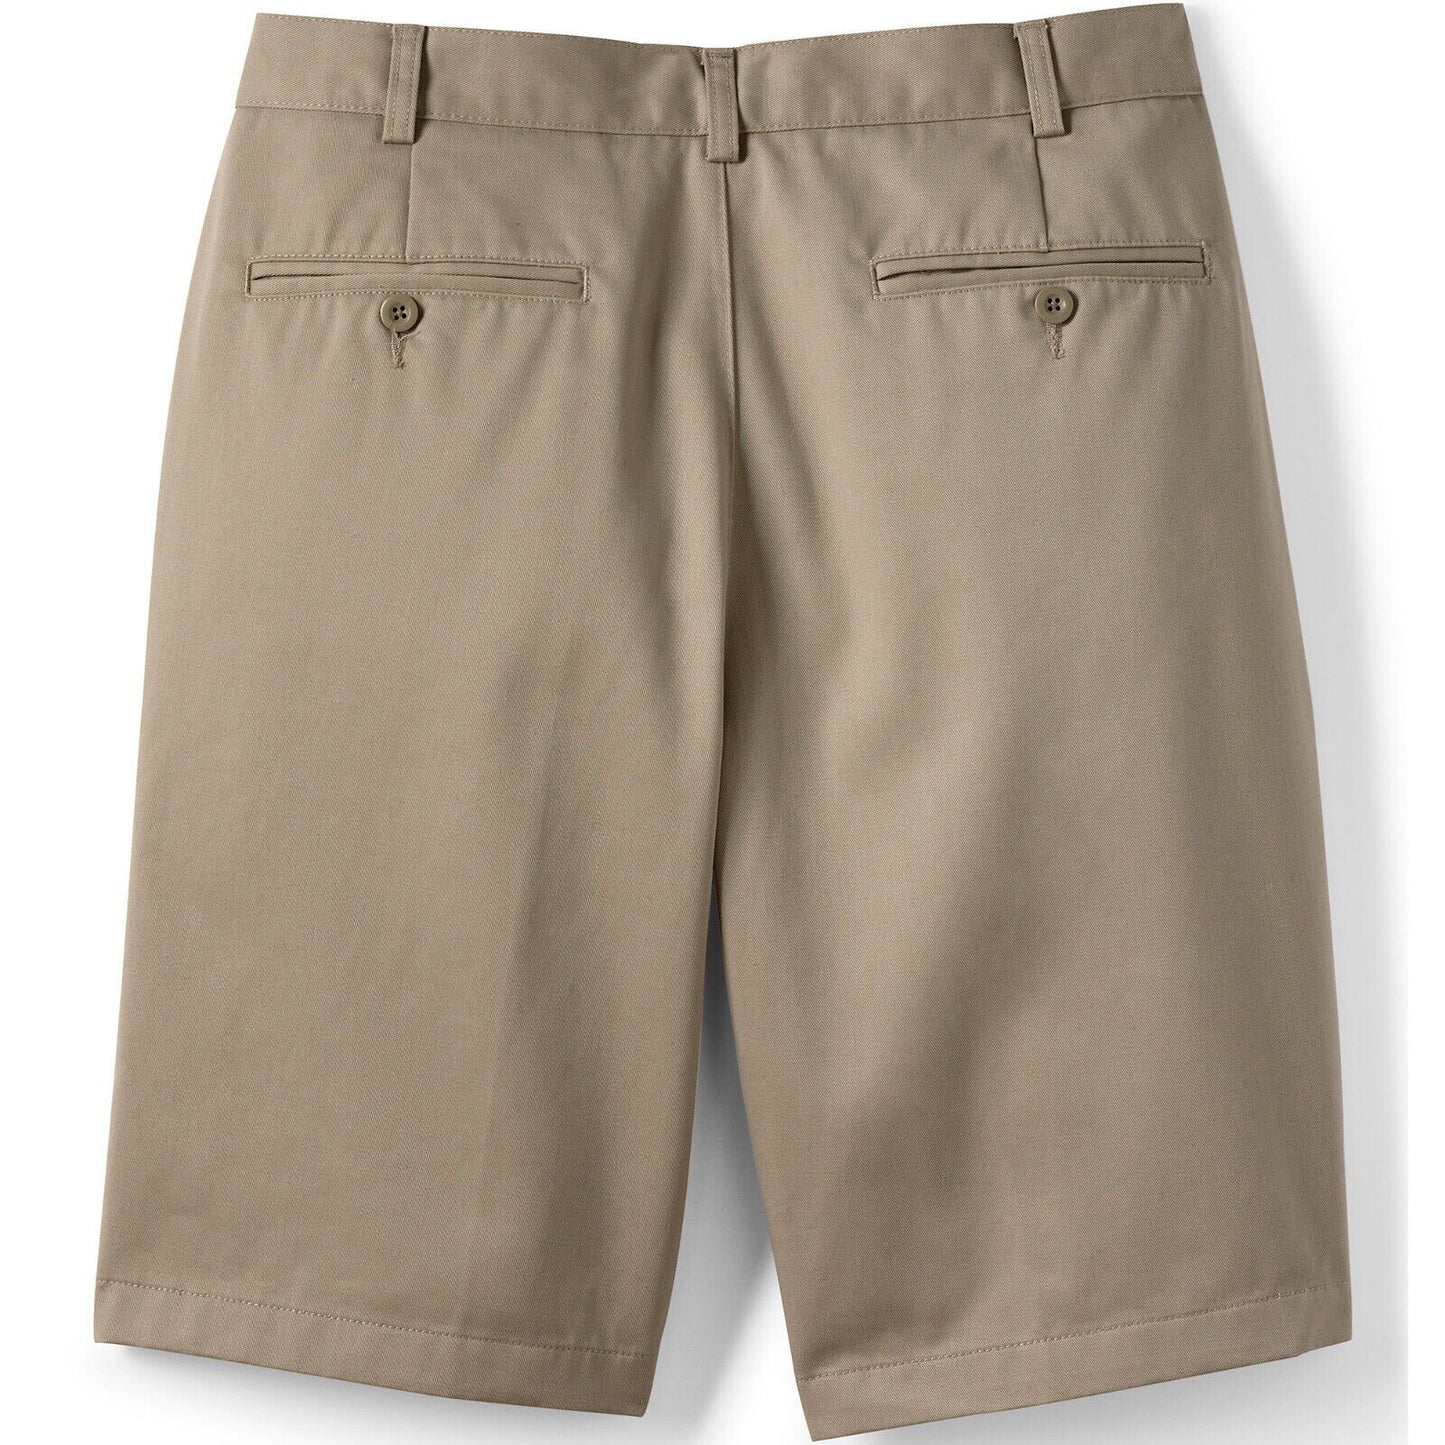 Men's 11" Wrinkle Resistant Chino Shorts Size 29